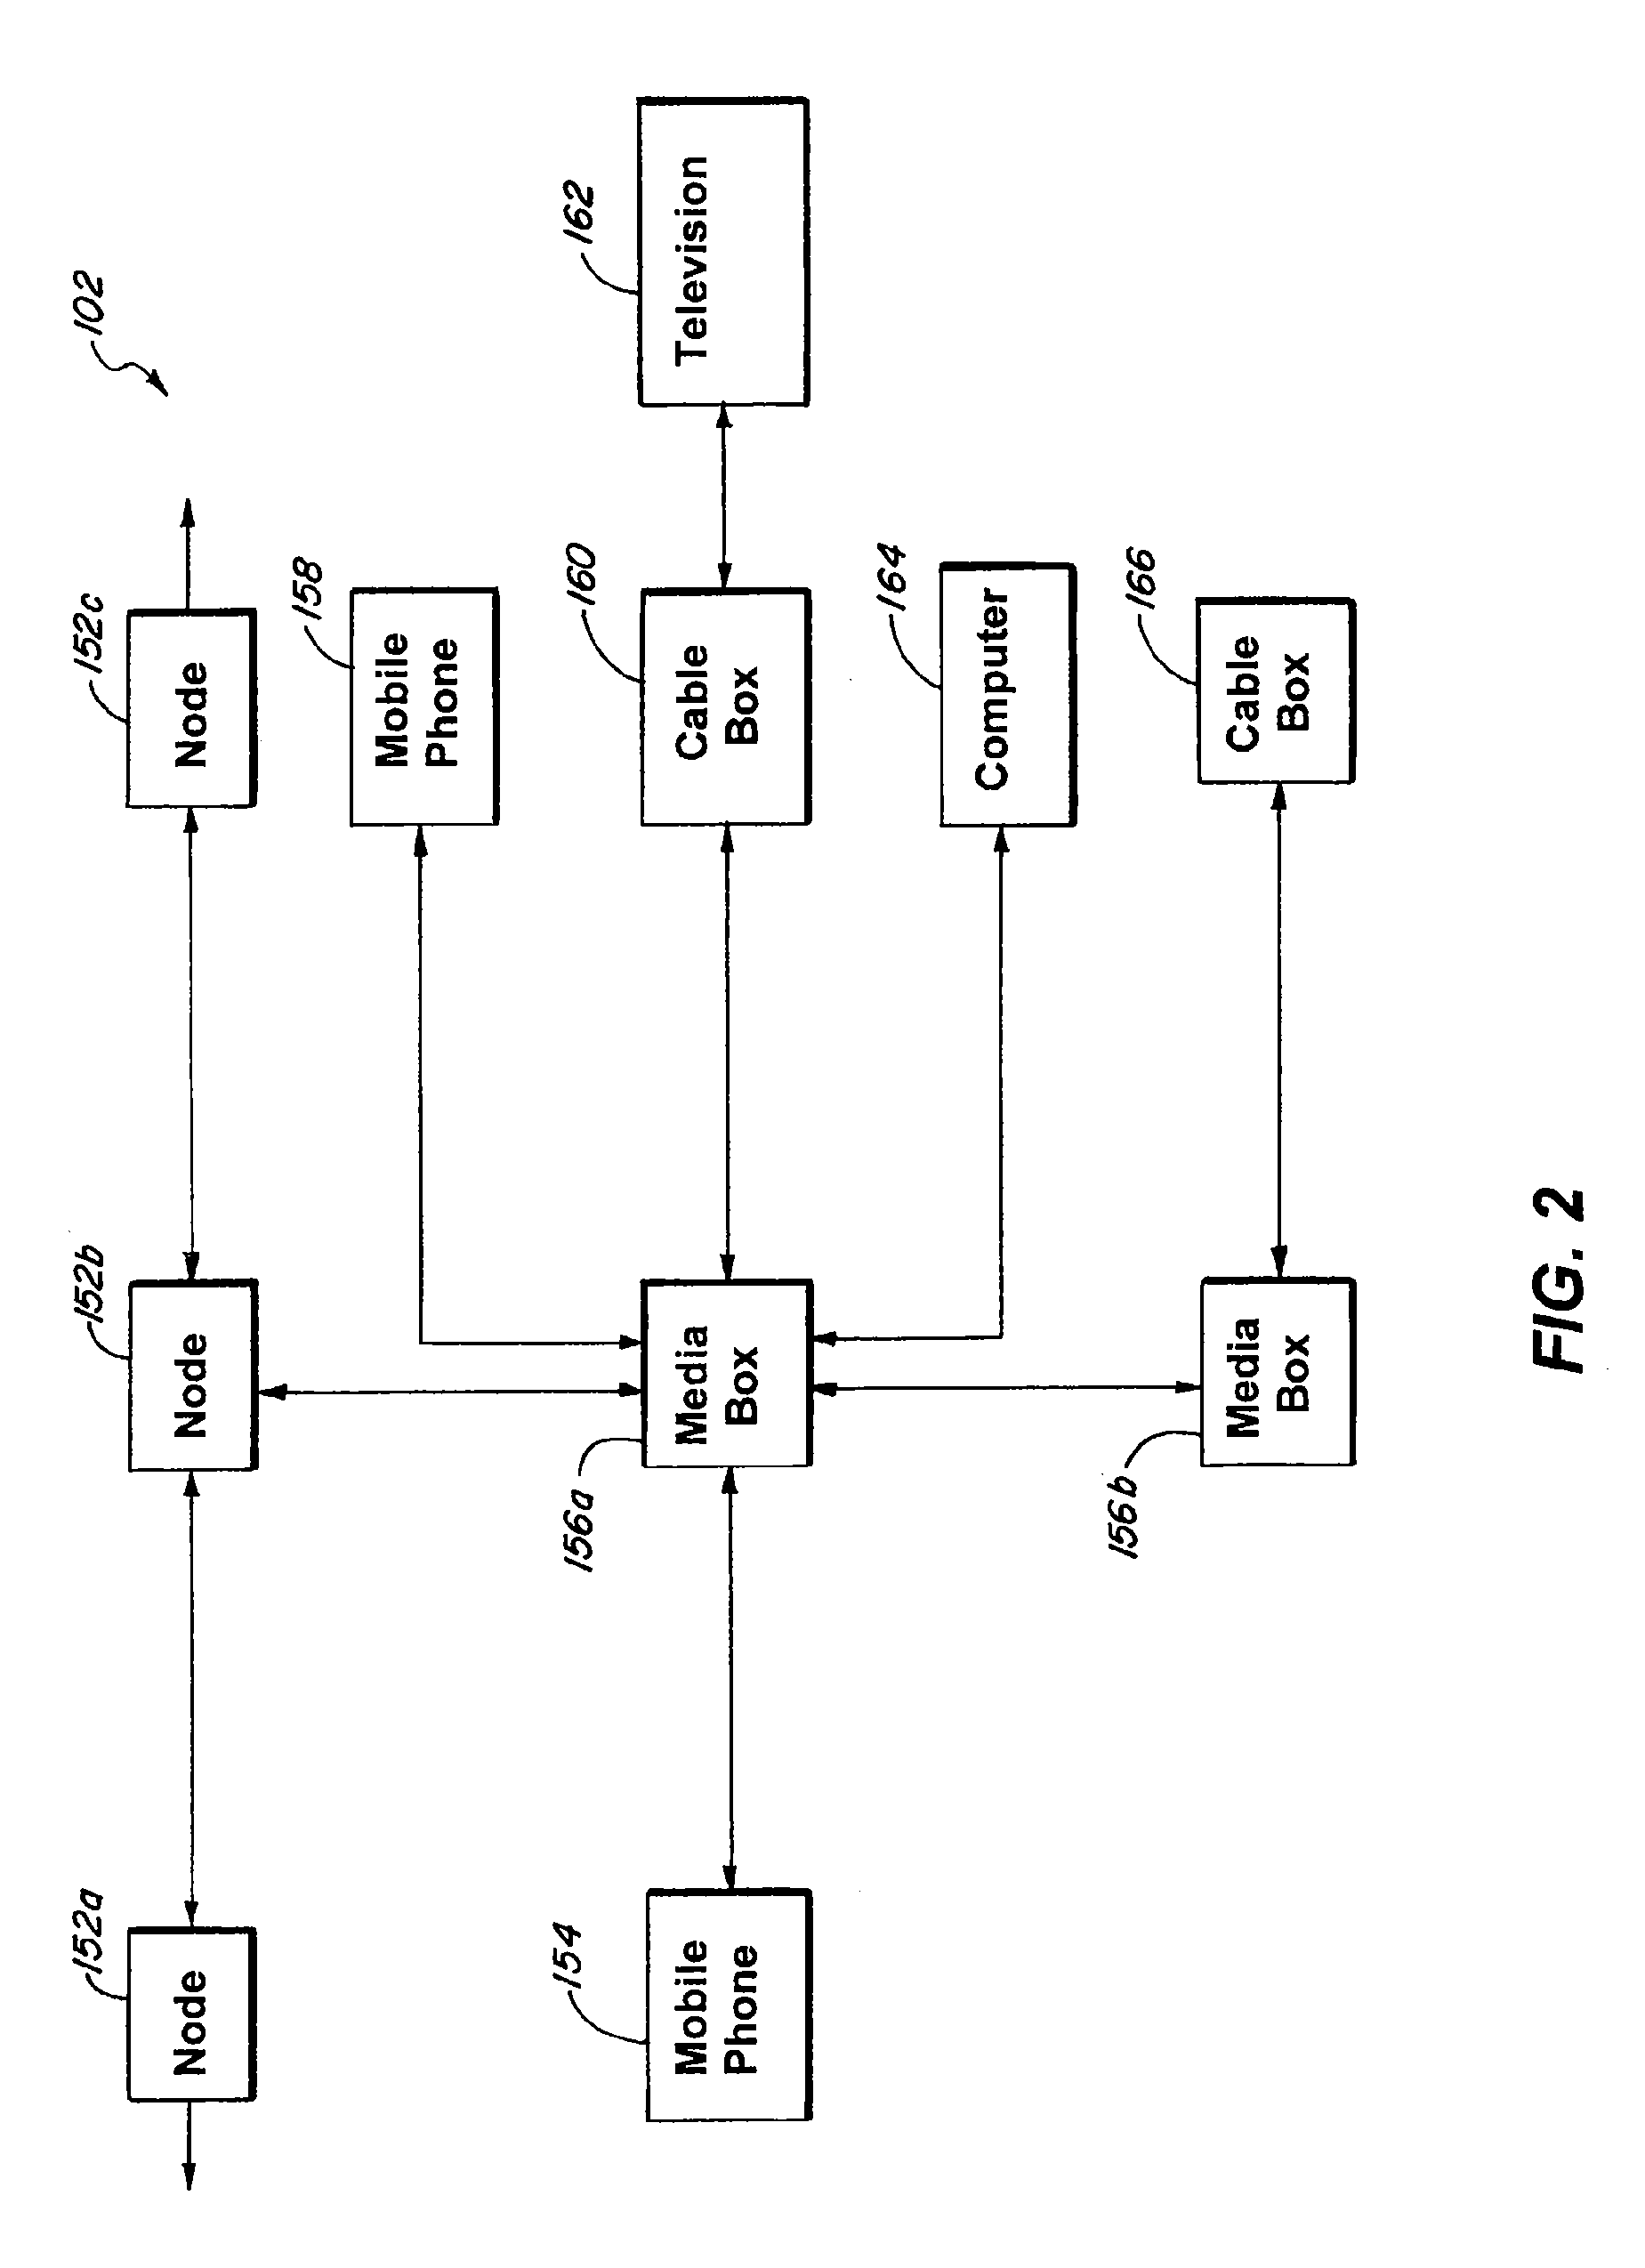 Method and system for providing information access, multimedia content access, and phone connectivity